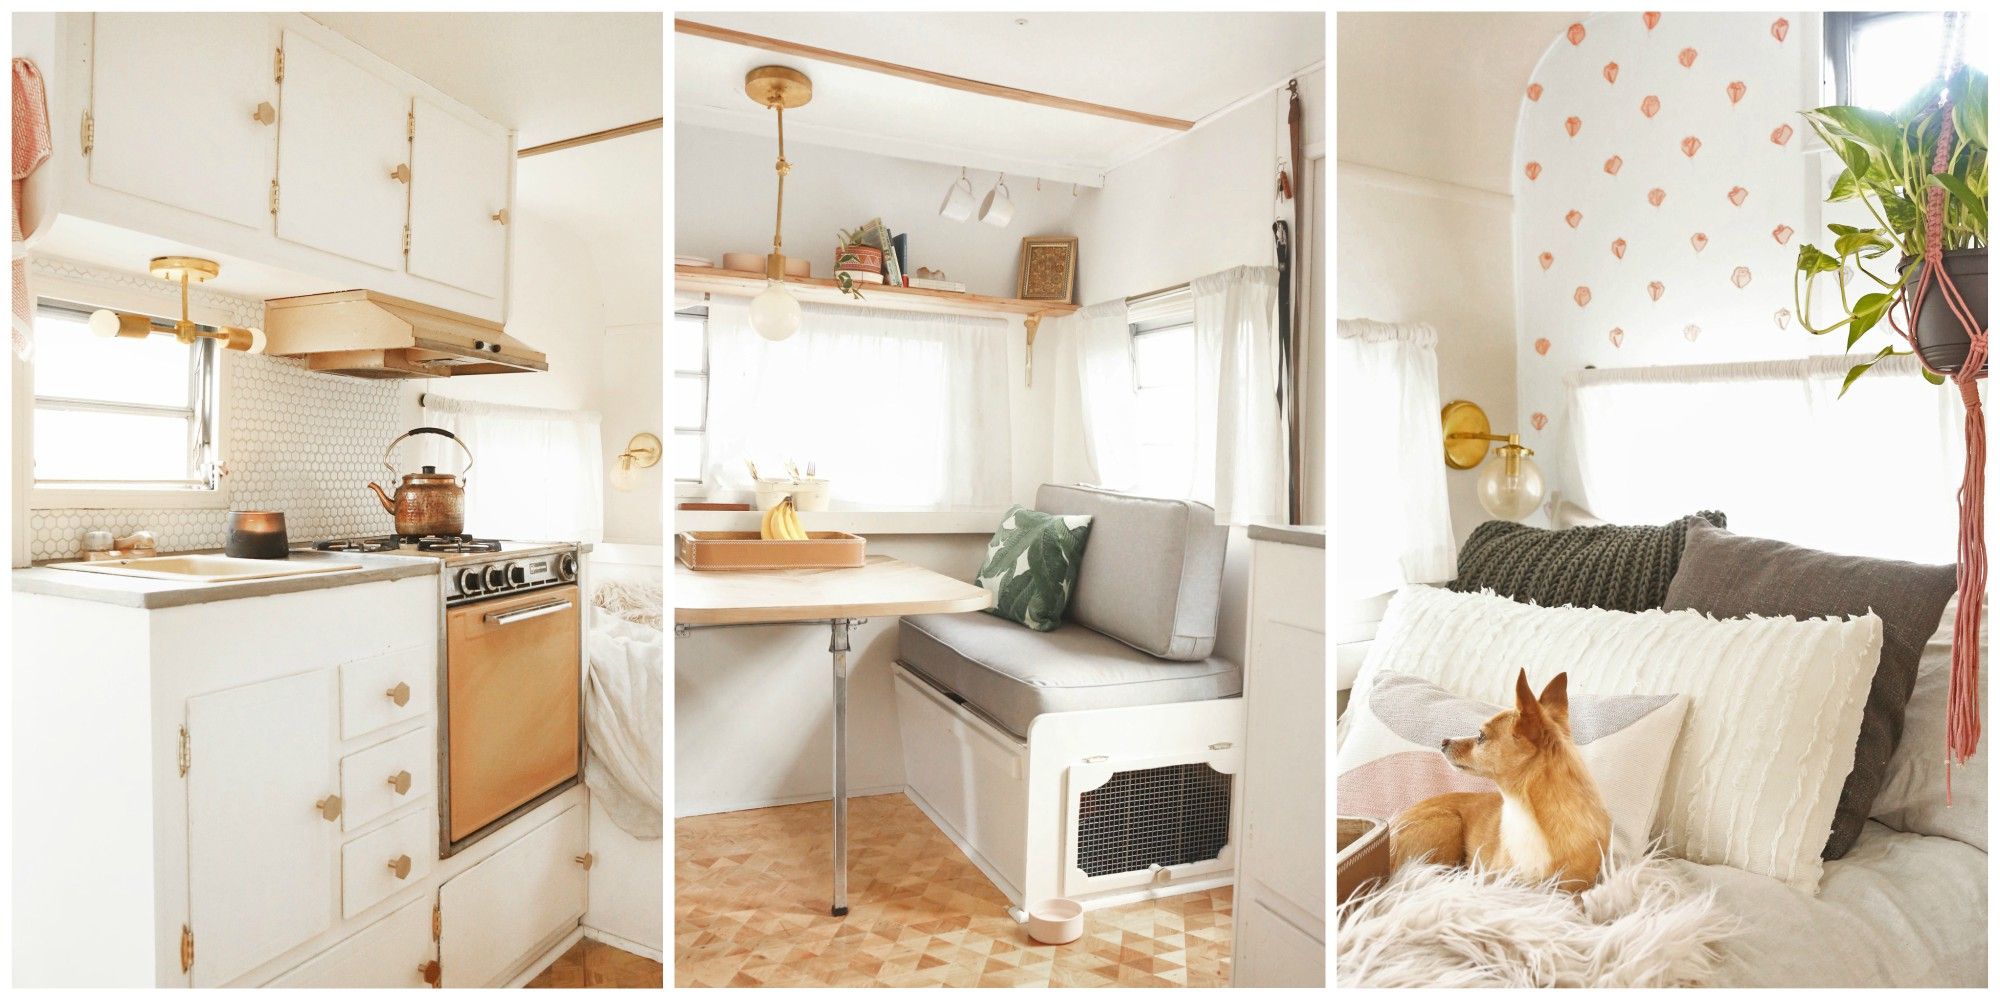 20 Best Travel Trailer & RV Decorating Ideas (Easy to Do!)